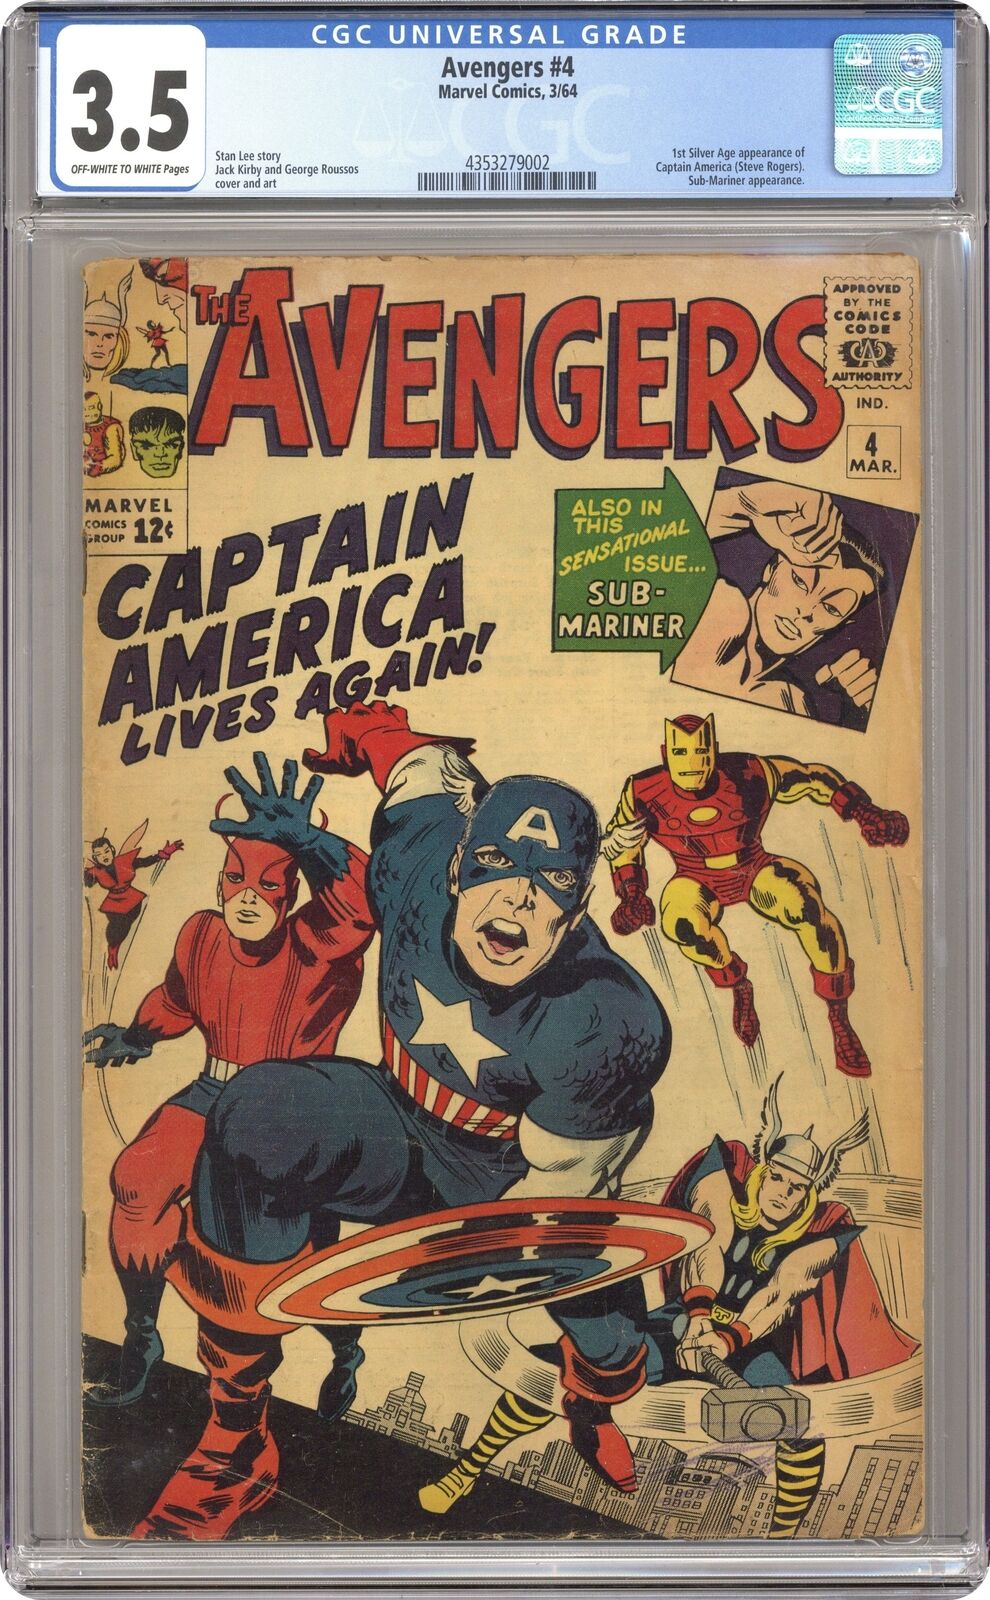 Avengers #4 CGC 3.5 1964 4353279002 1st Silver Age Captain America and Bucky